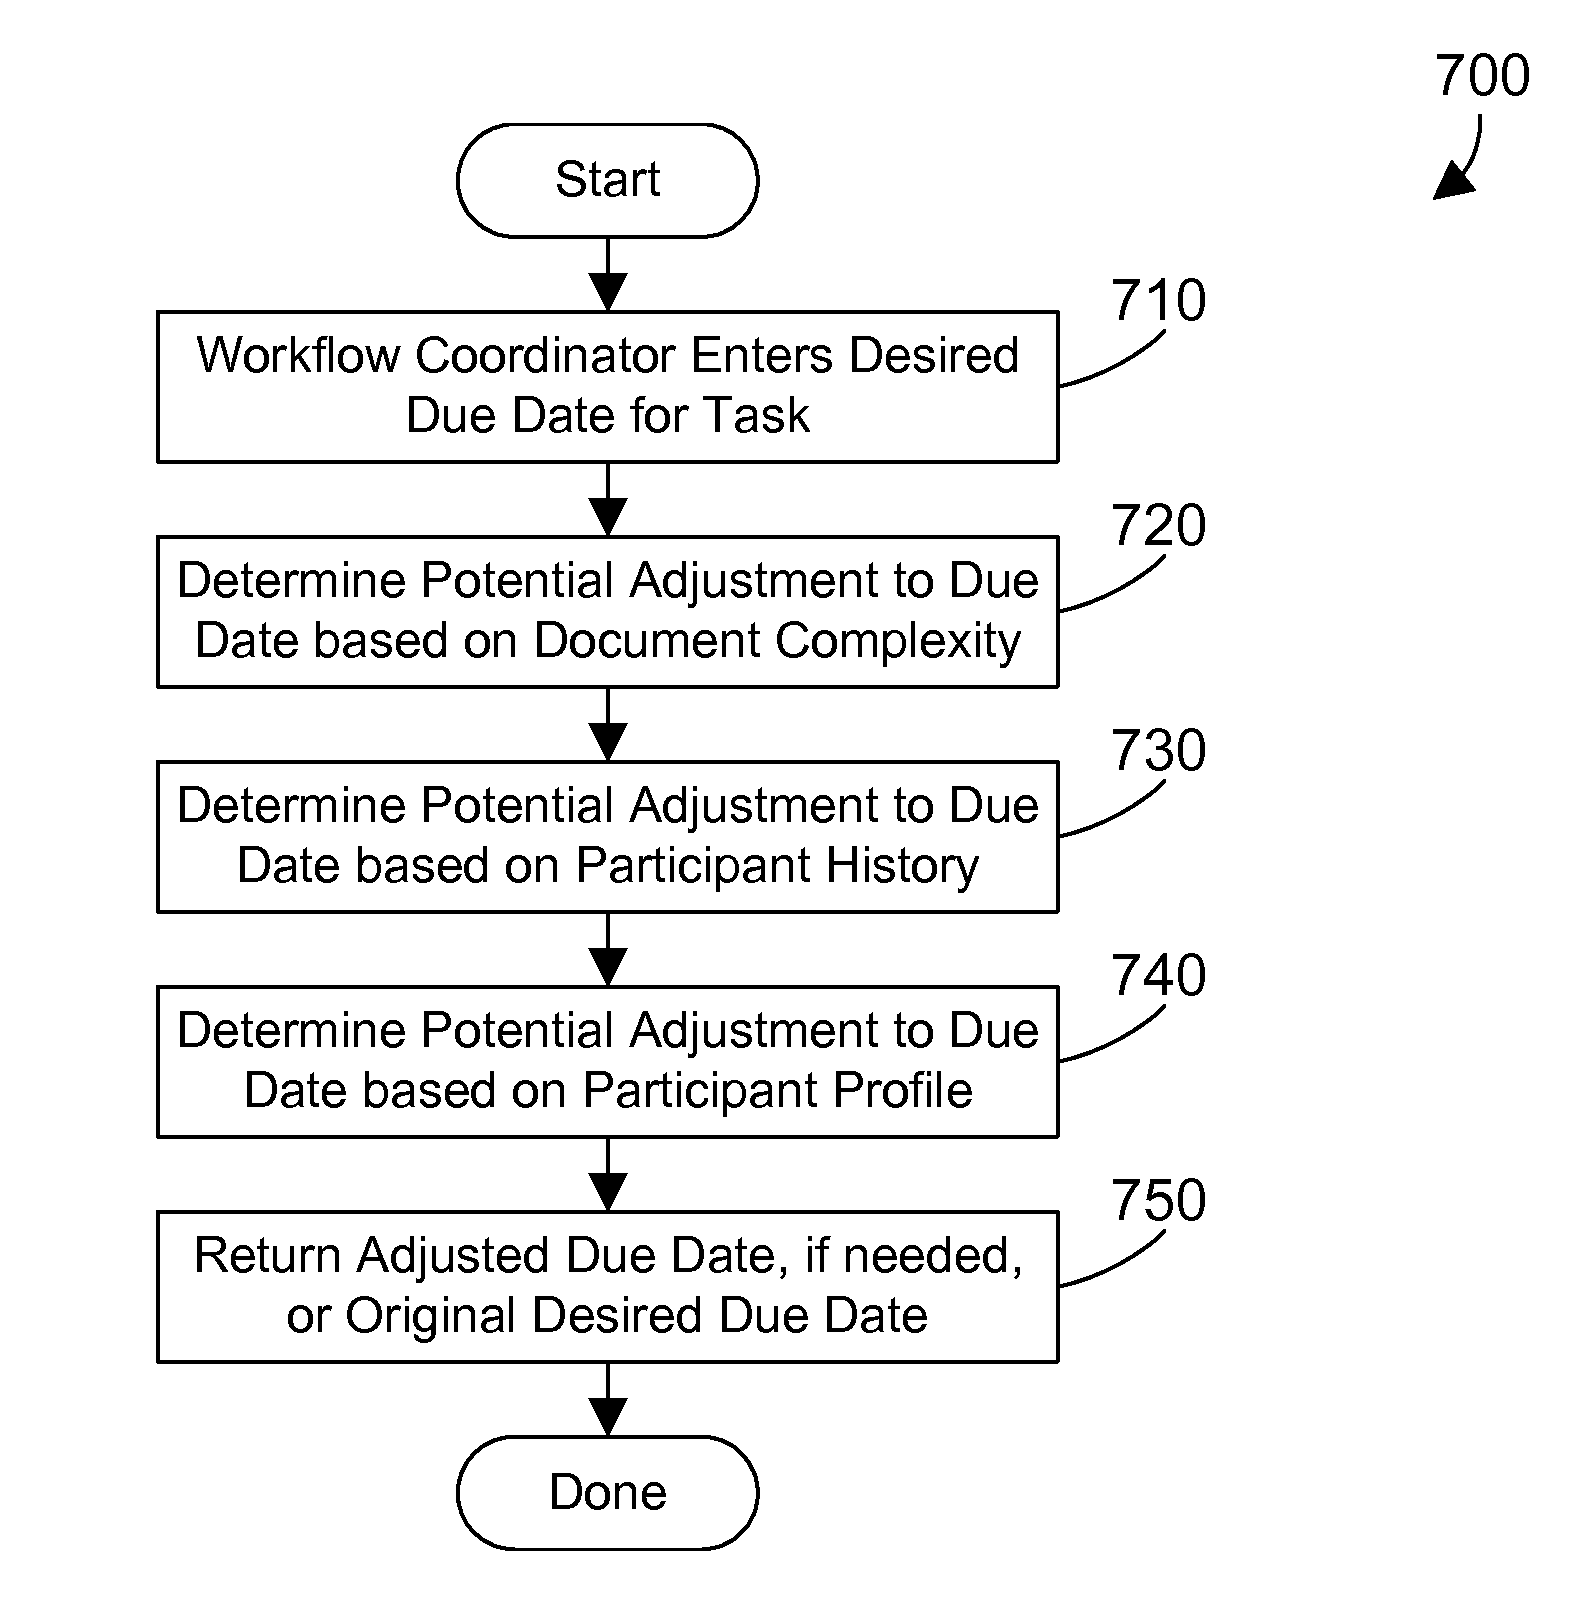 Customizing workflow based on participant history and participant profile